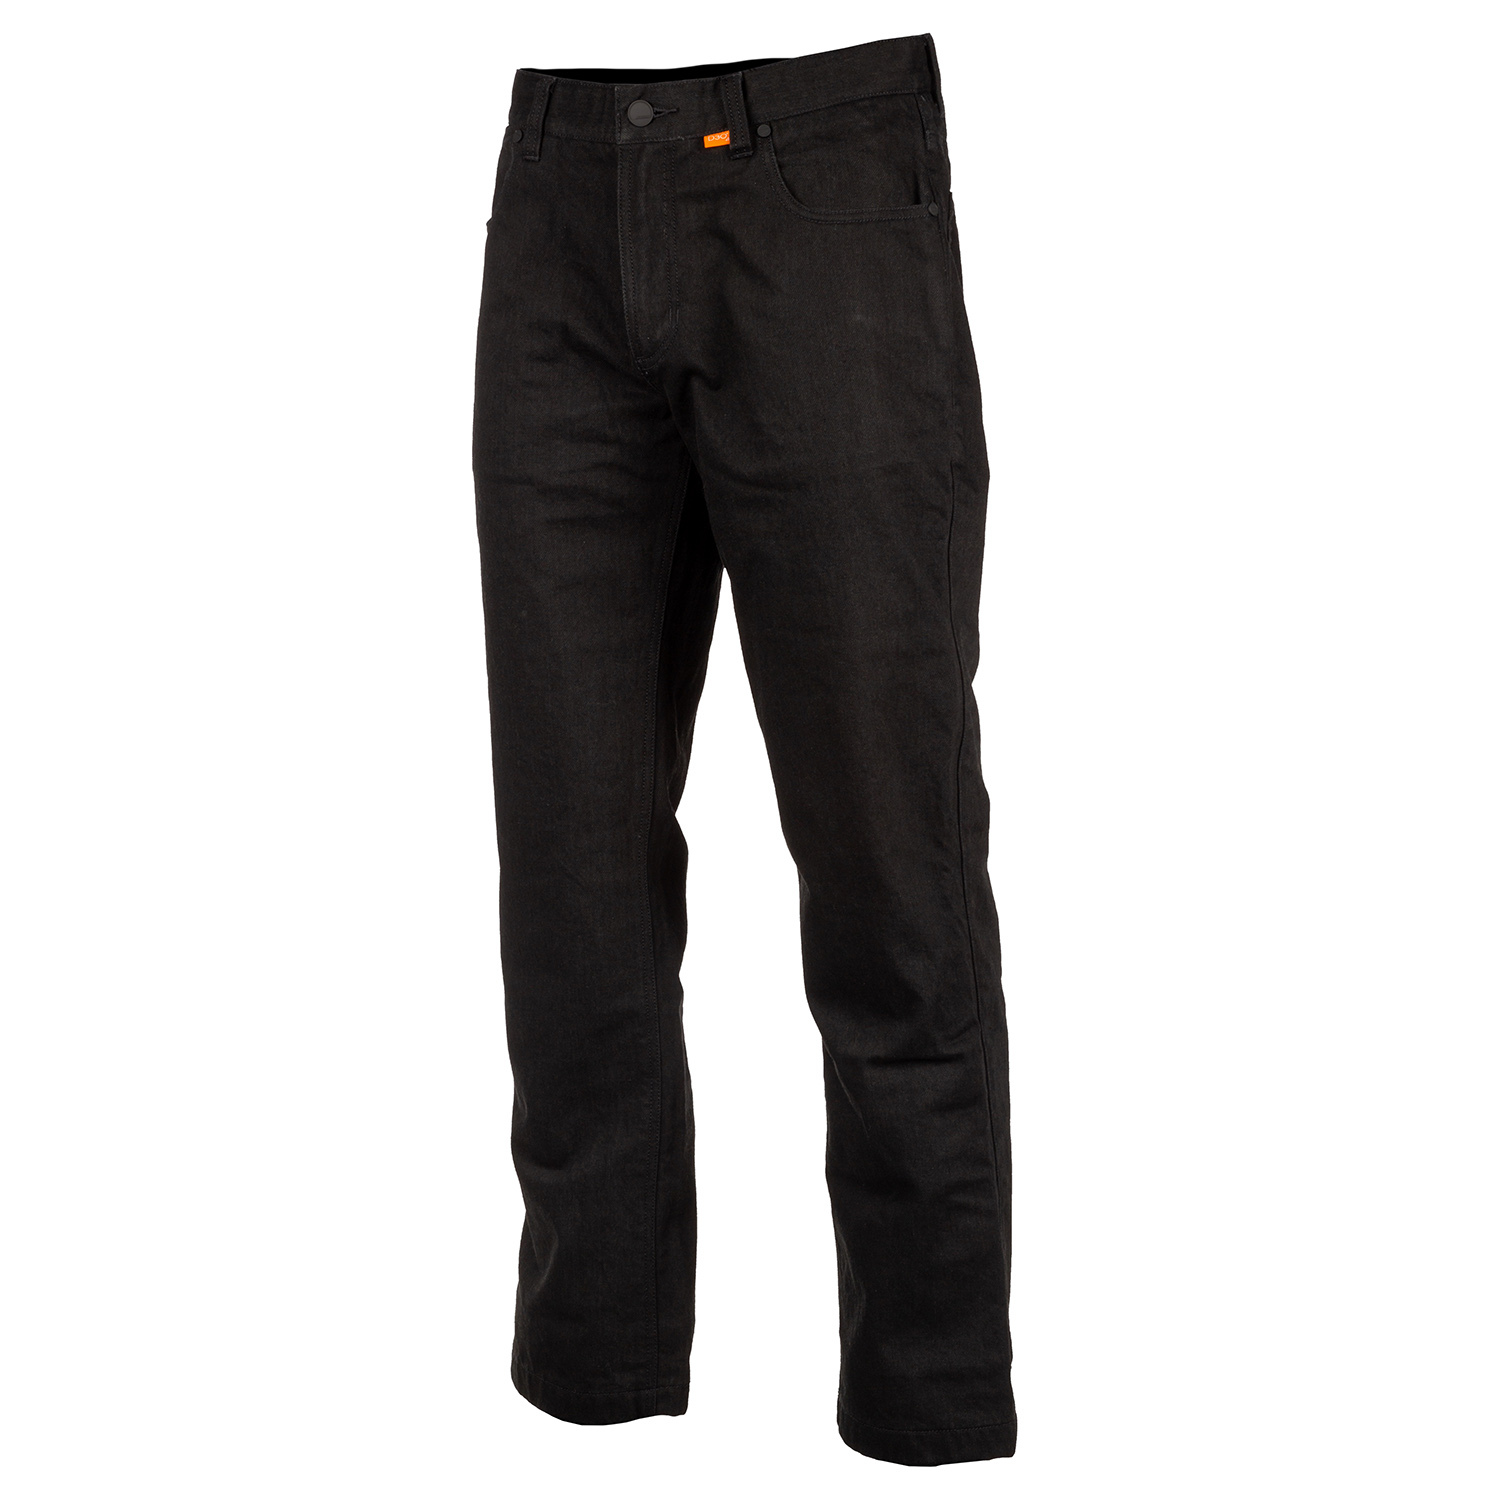 Ironsides Indigo Armored Denim Jeans. Features Protective DuPont